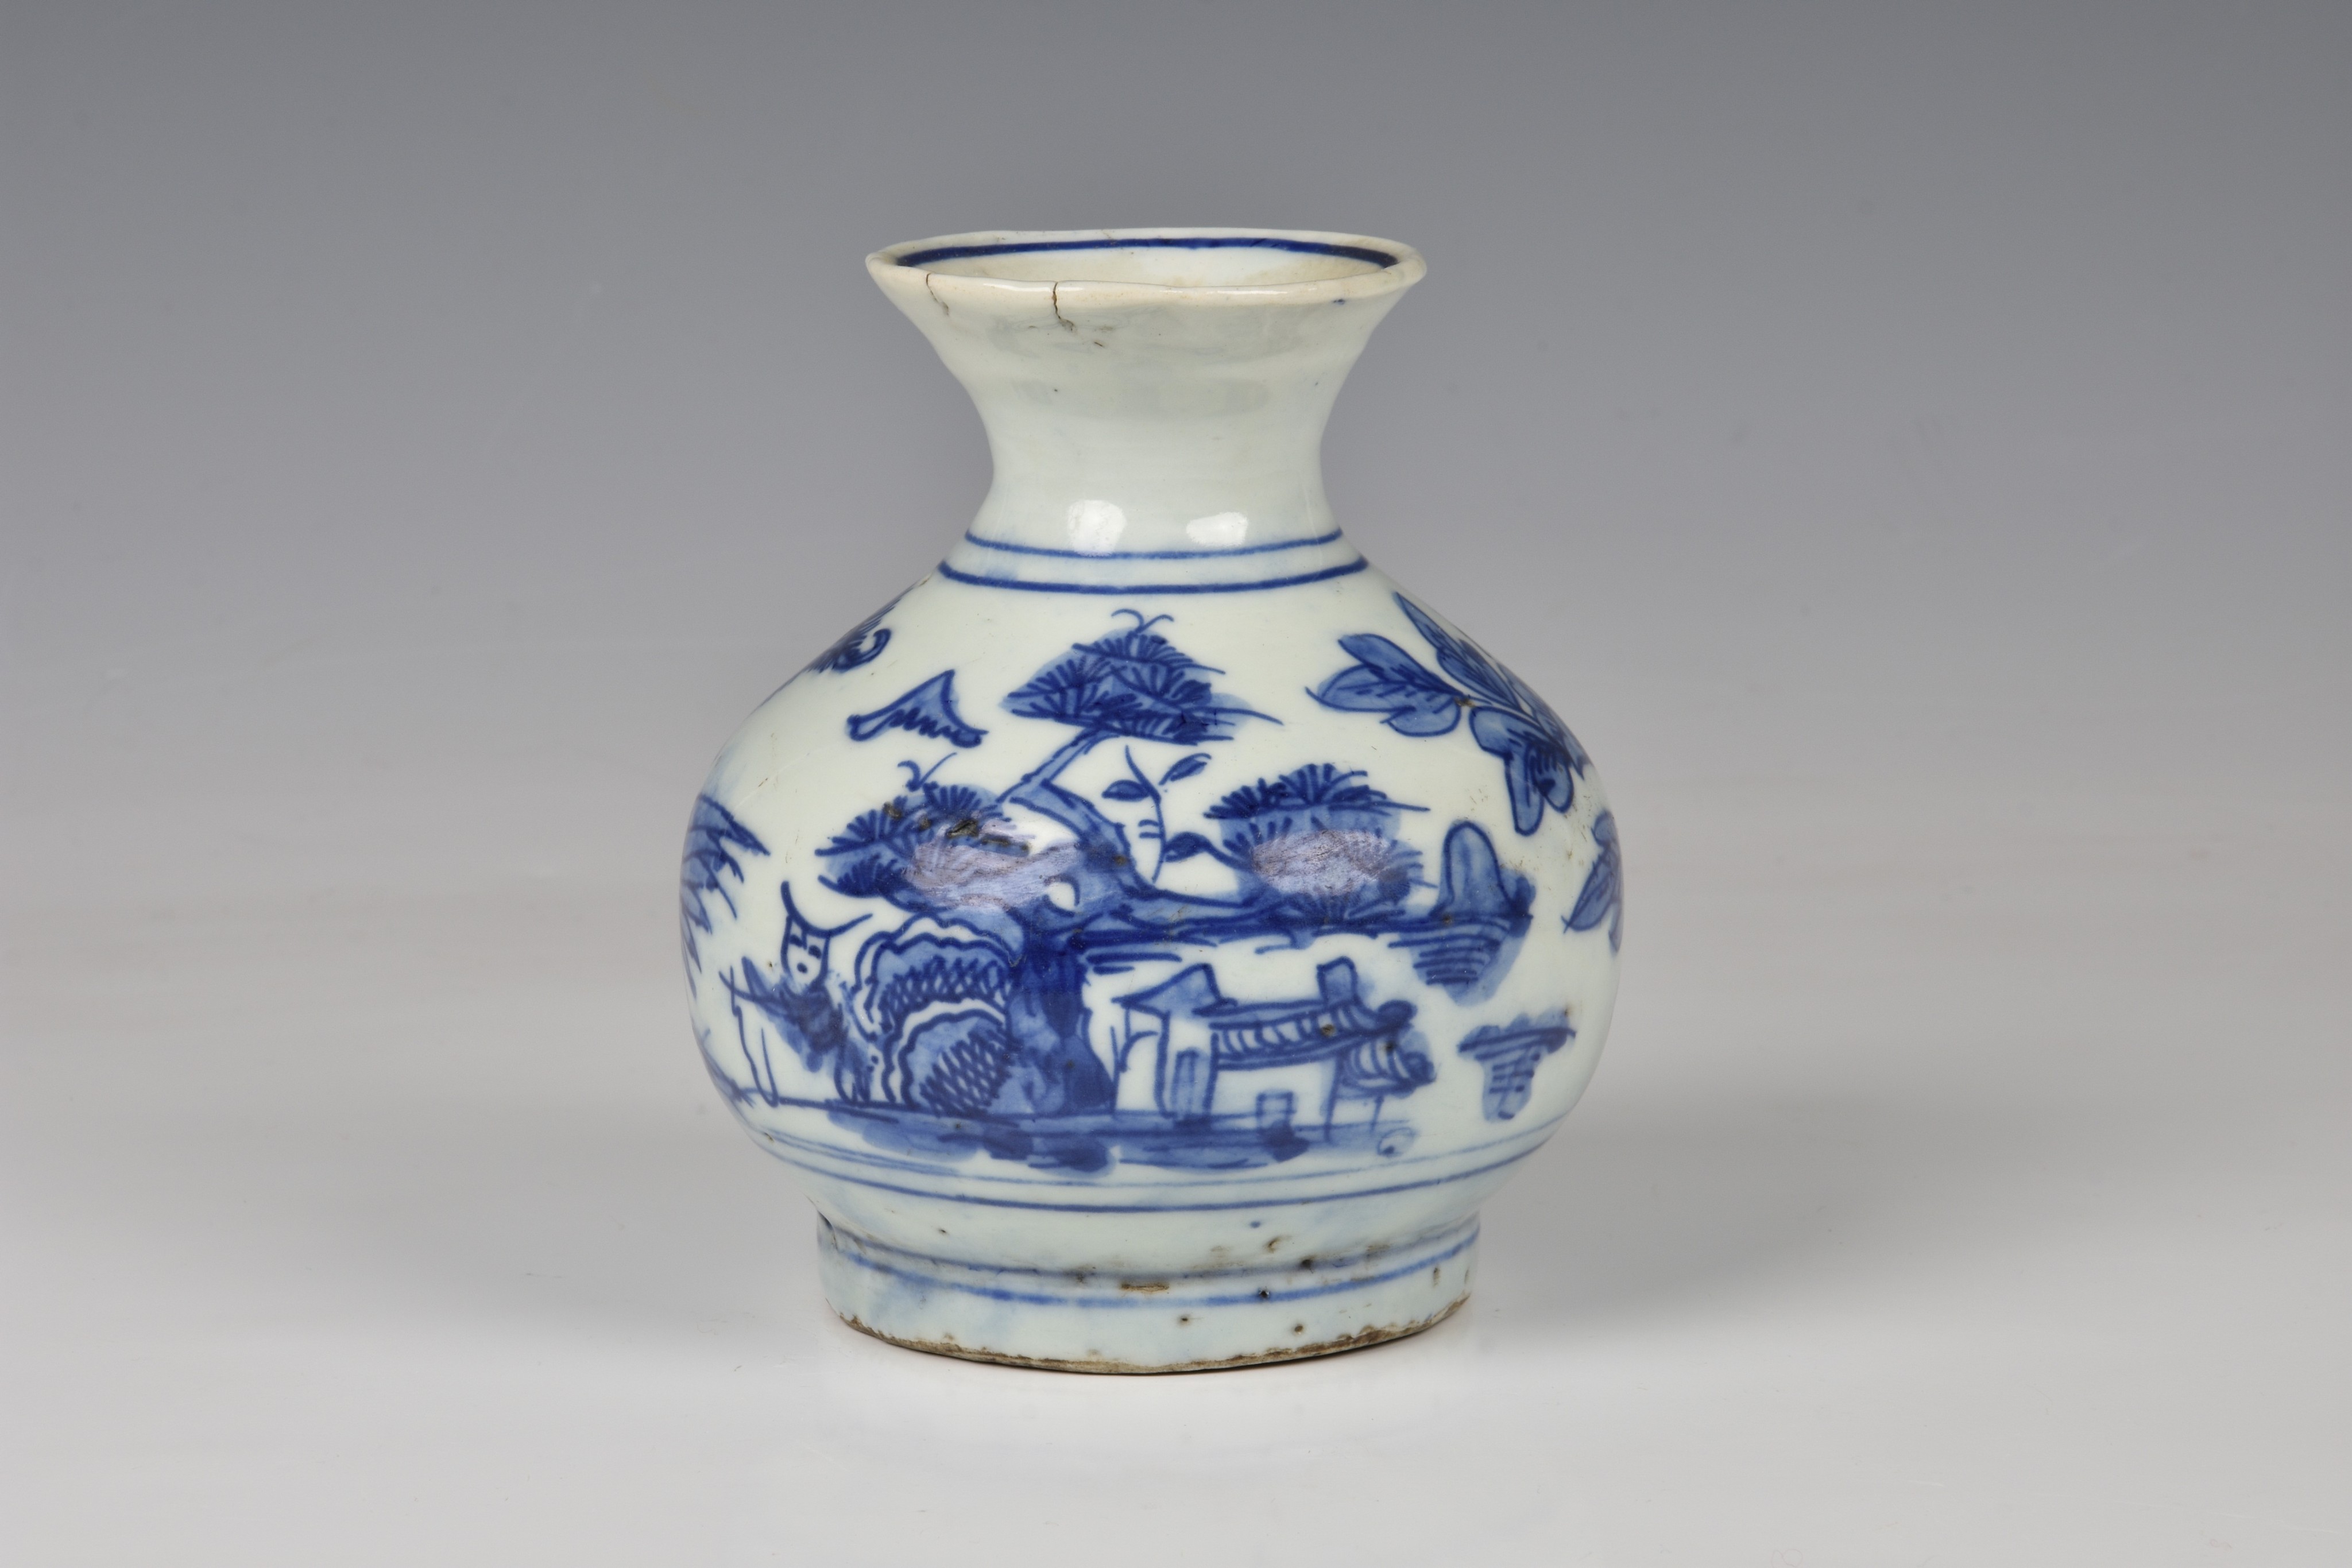 A Chinese blue and white porcelain vase, 19th / early 20th century, of stout, baluster form, painted